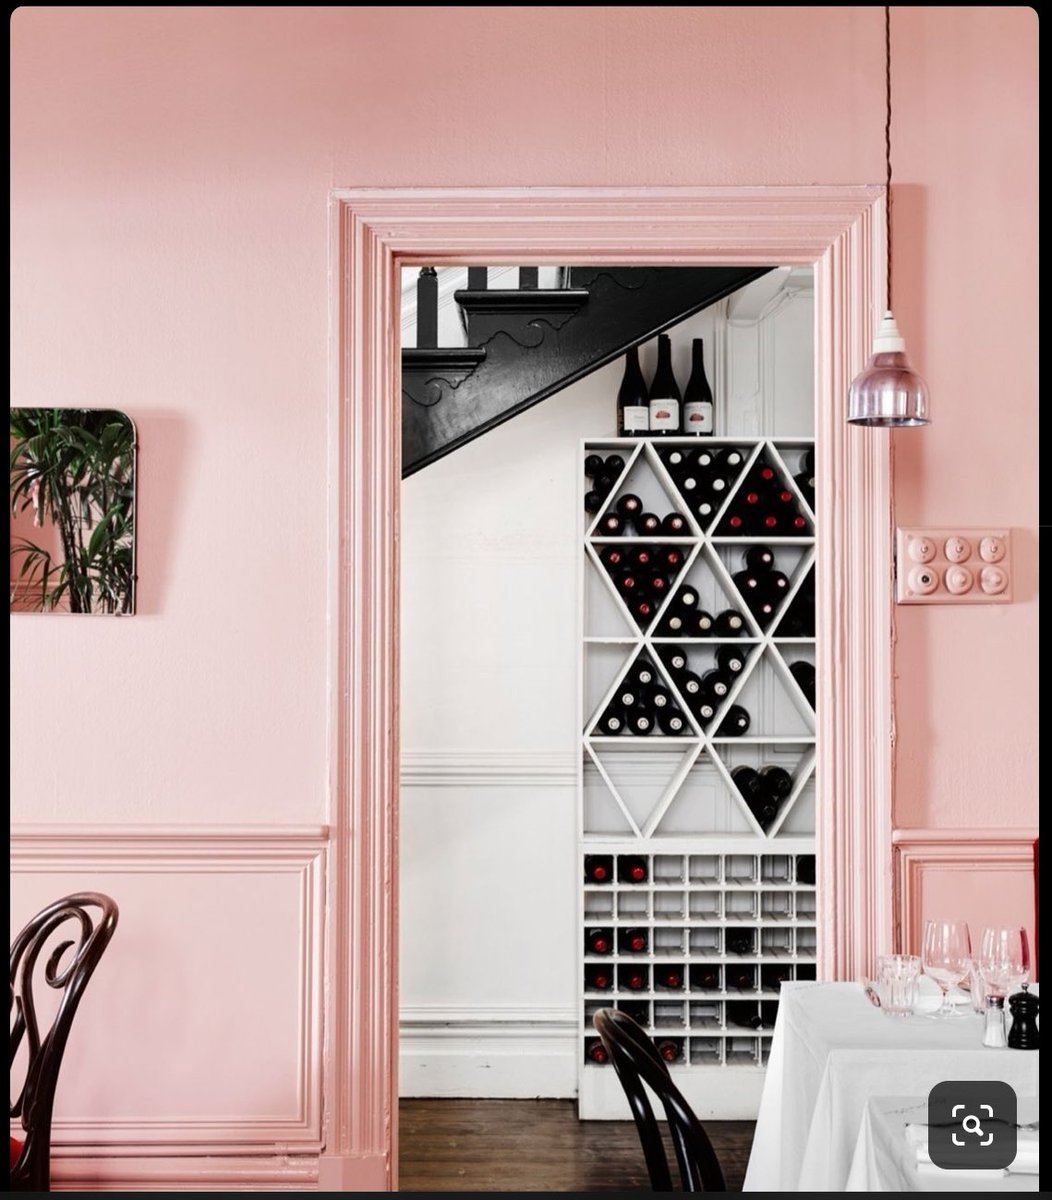 Mixing your colors with your personal neutrals will make your overall palette.The photo on the left has stark black and white as th baseline, black being the neutral, and pink being the color.On the right a similar pink & white are being supported by pale wood instead of black.